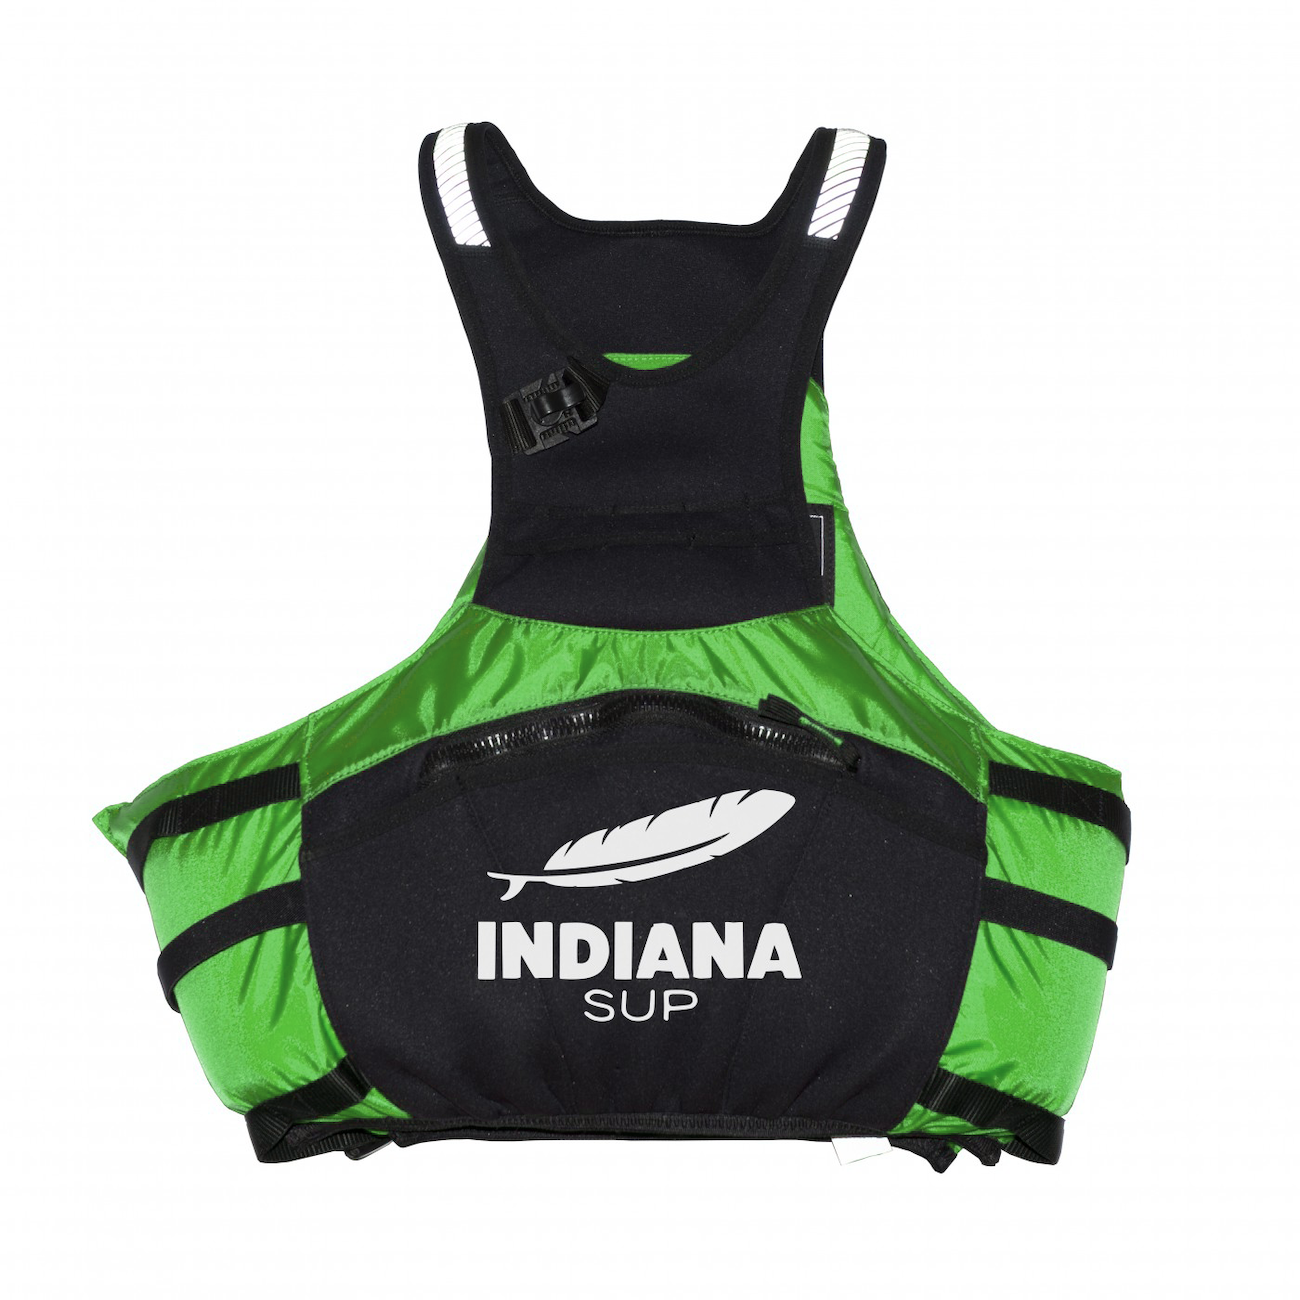 Indiana Stamina Vest L/XL (ISO Norm 12402-5) green